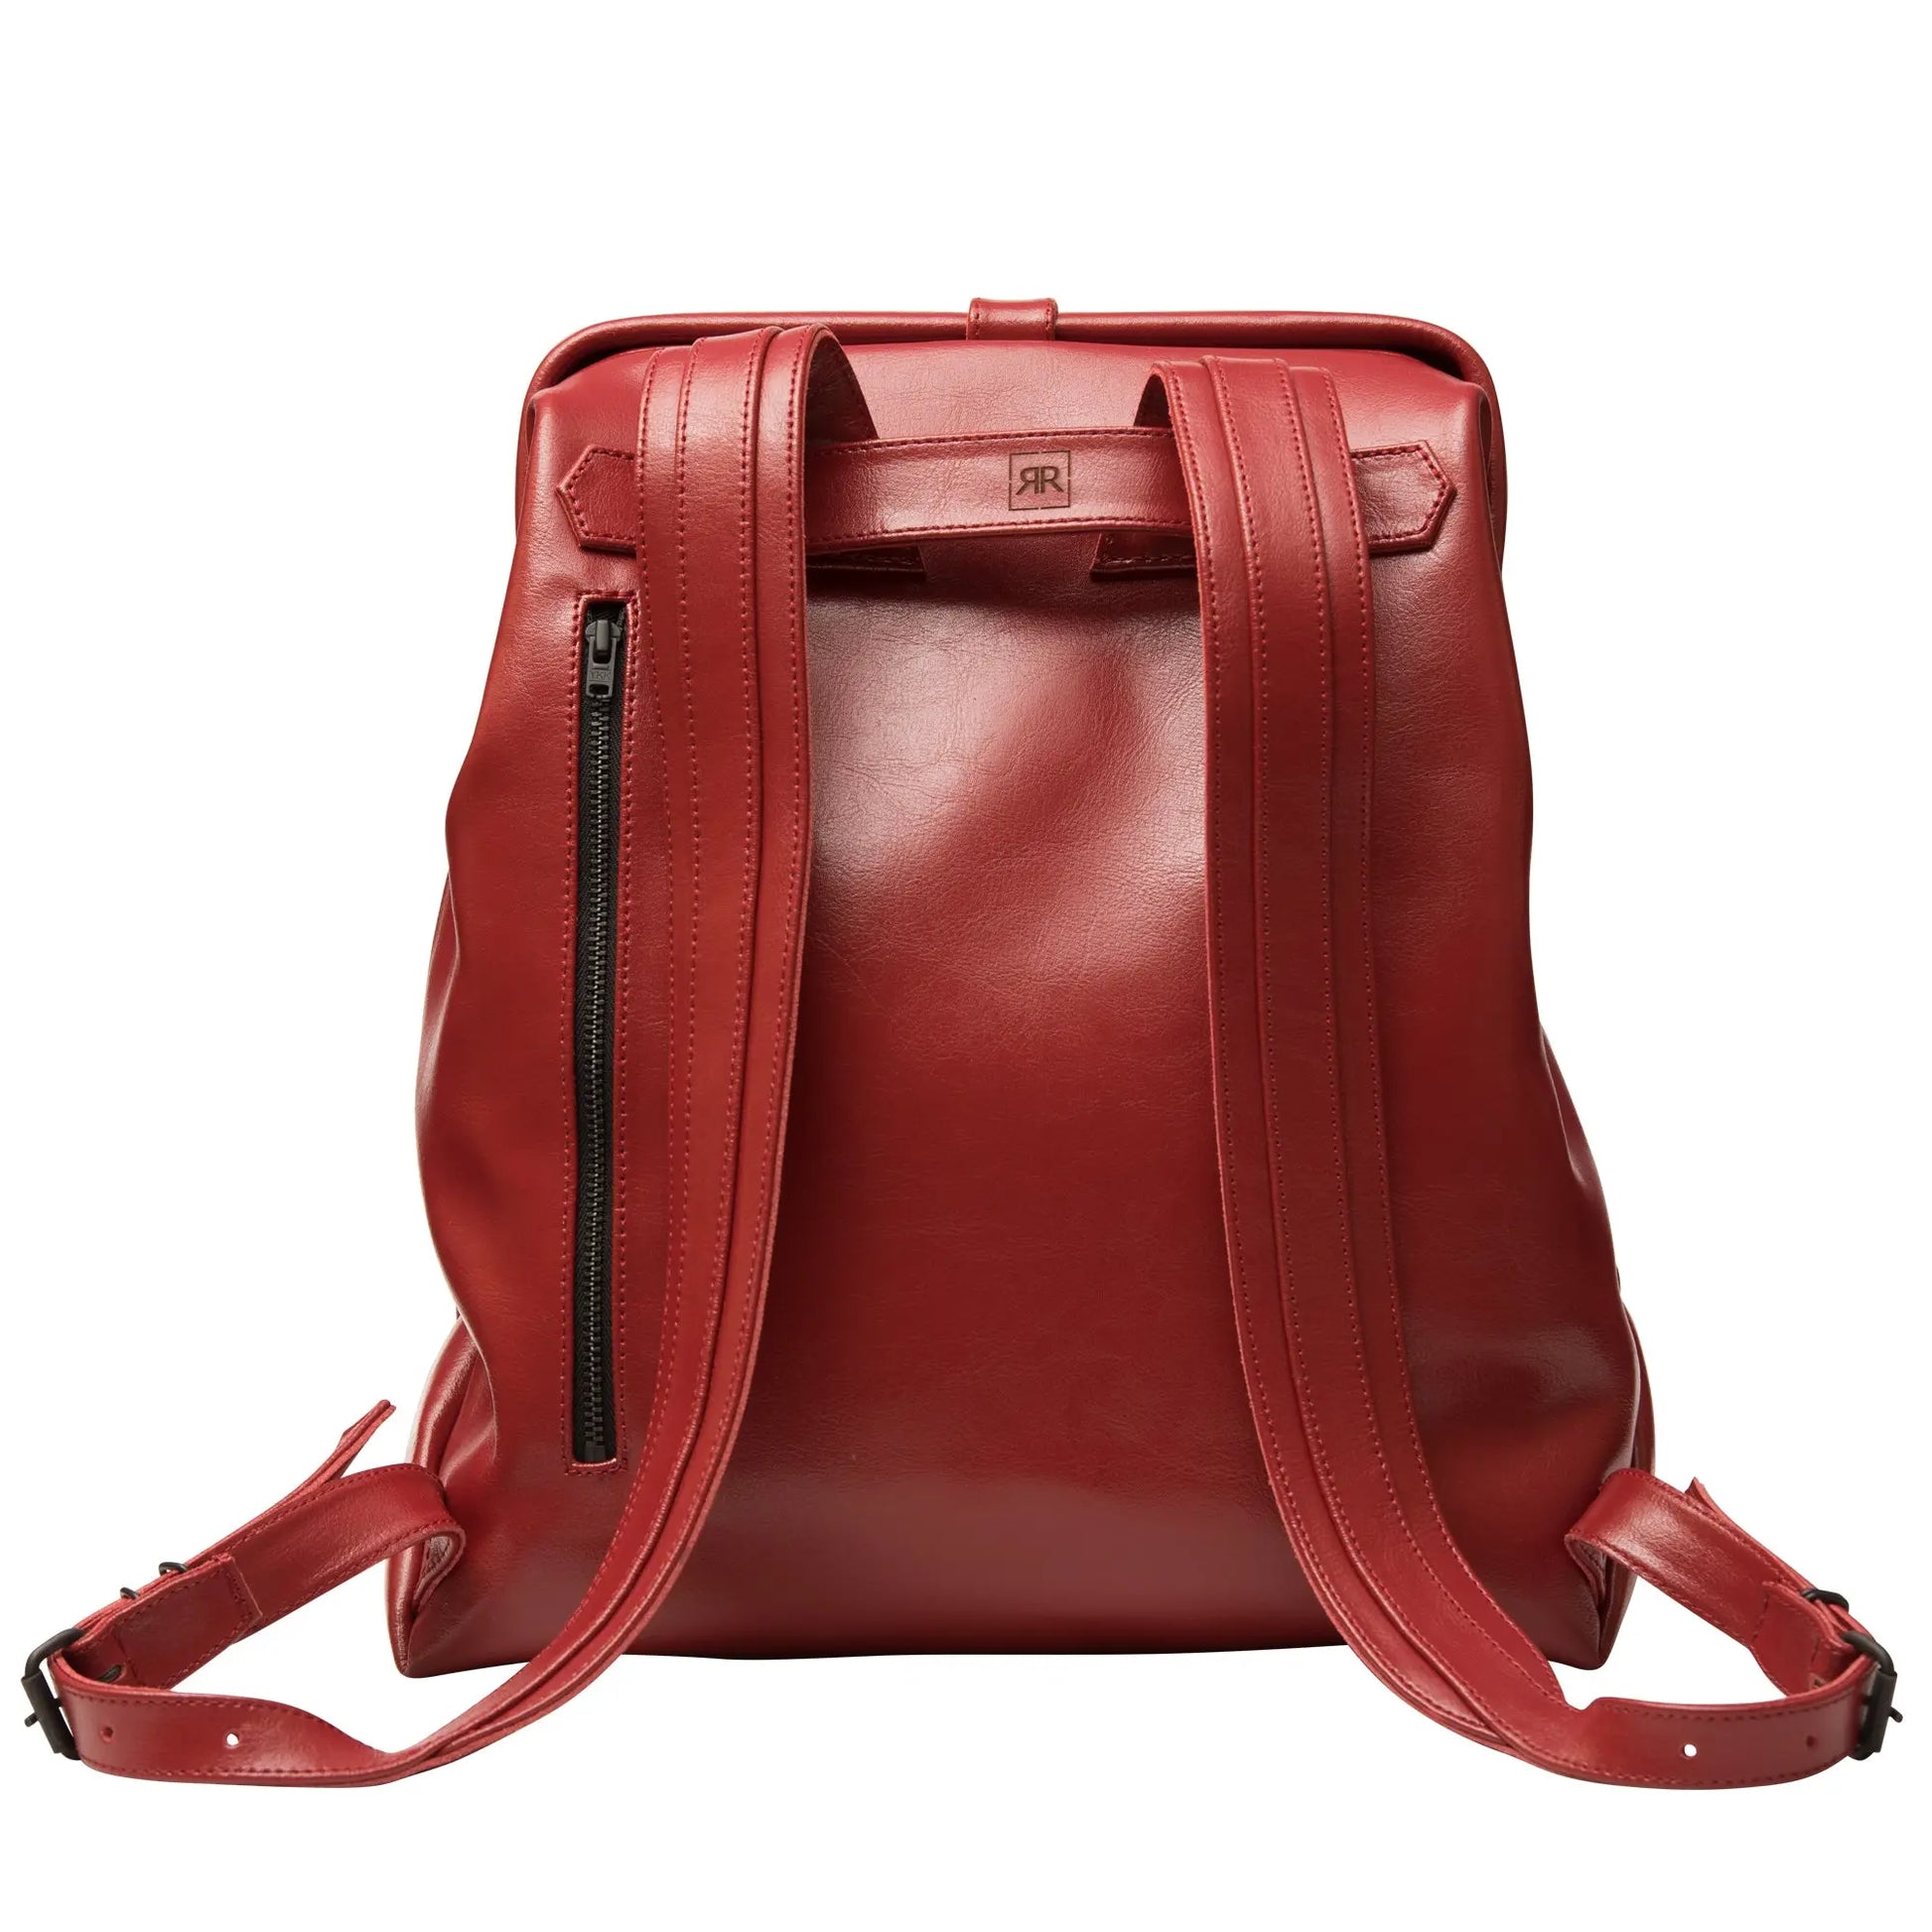 Red Leather Backpack - Medium & Large: Vintage doctor bag-inspired design with adjustable shoulder straps, grab handle, pin-buckle closure, outer zip pocket, and quality leather craftsmanship. Fits laptops up to 17 inches.